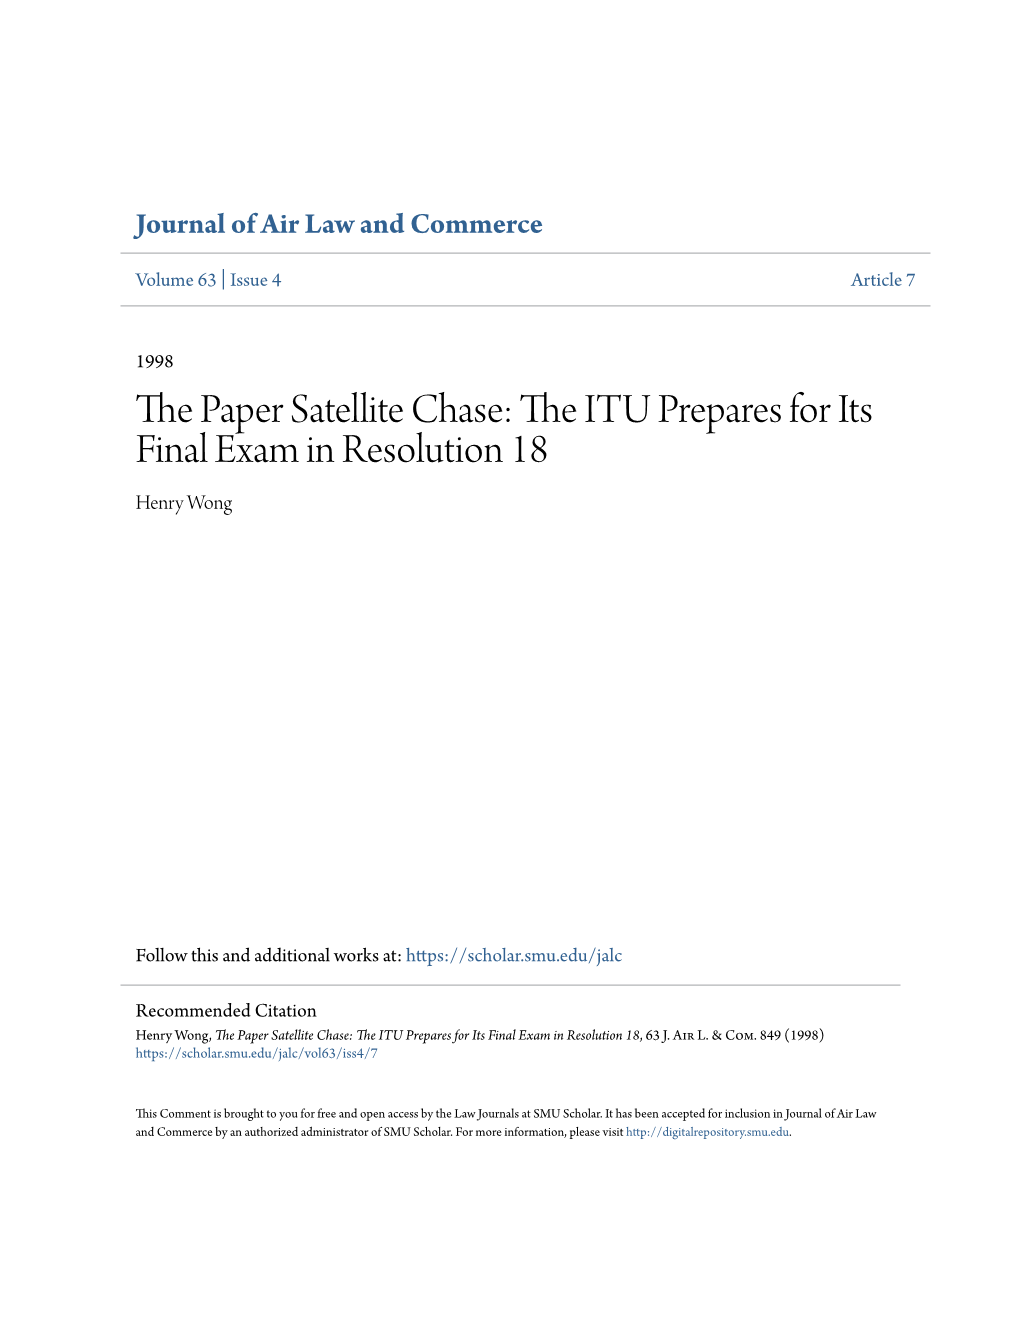 The Paper Satellite Chase: the ITU Prepares for Its Final Exam in Resolution 18, 63 J